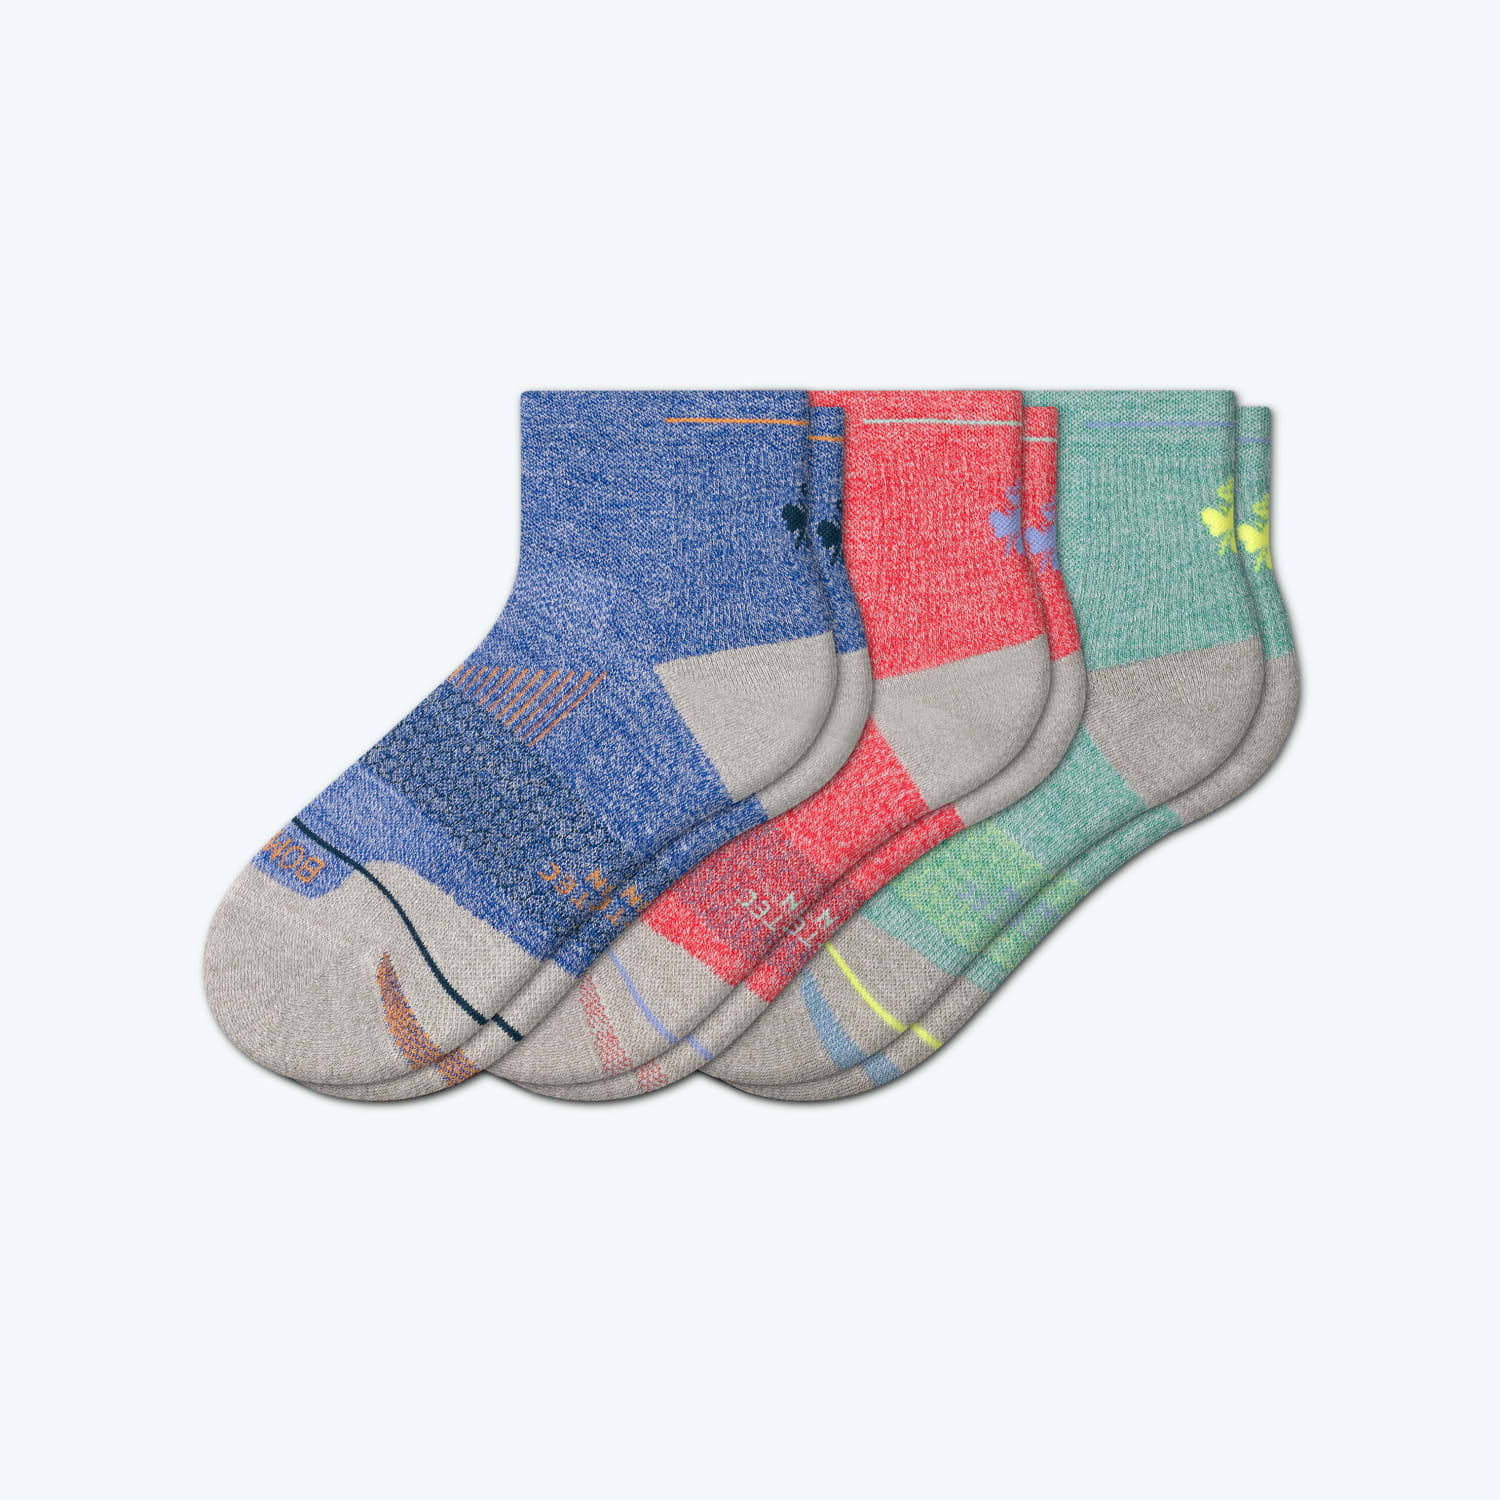 25% off Bombas socks, tshirts, and underwear sitewide $50